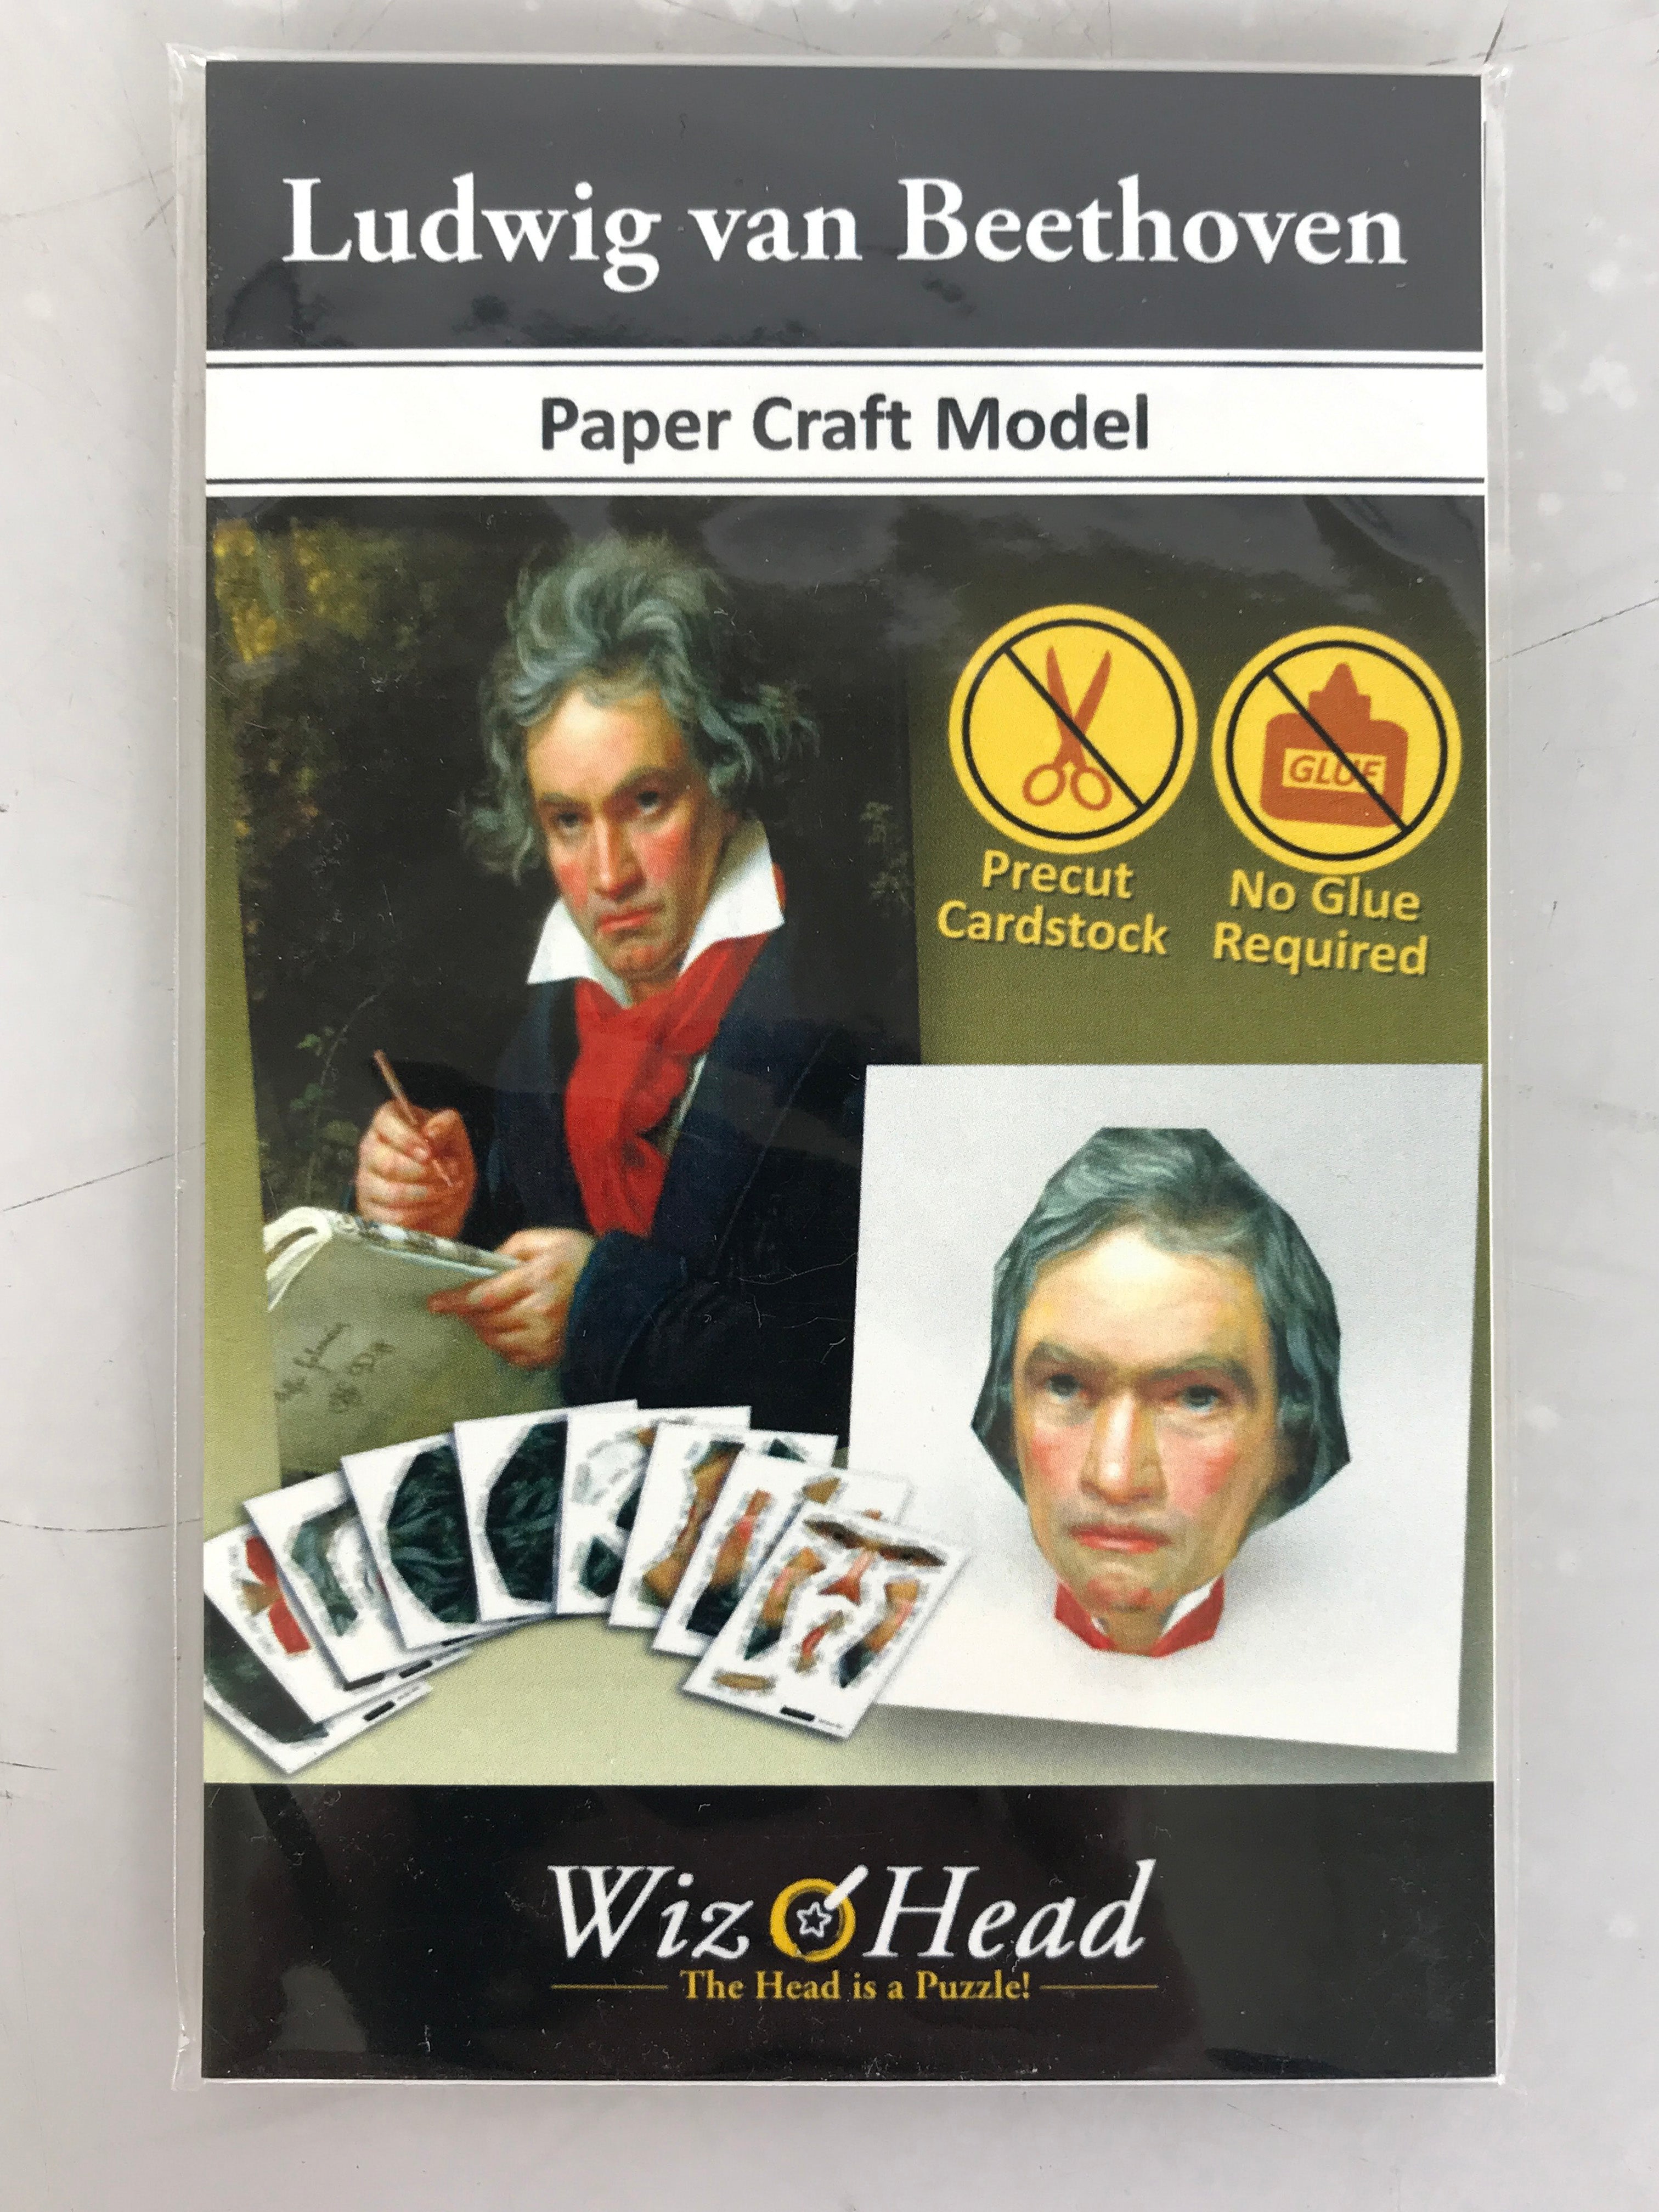 WizHead Ludwig van Beethoven Paper Craft Model Puzzle